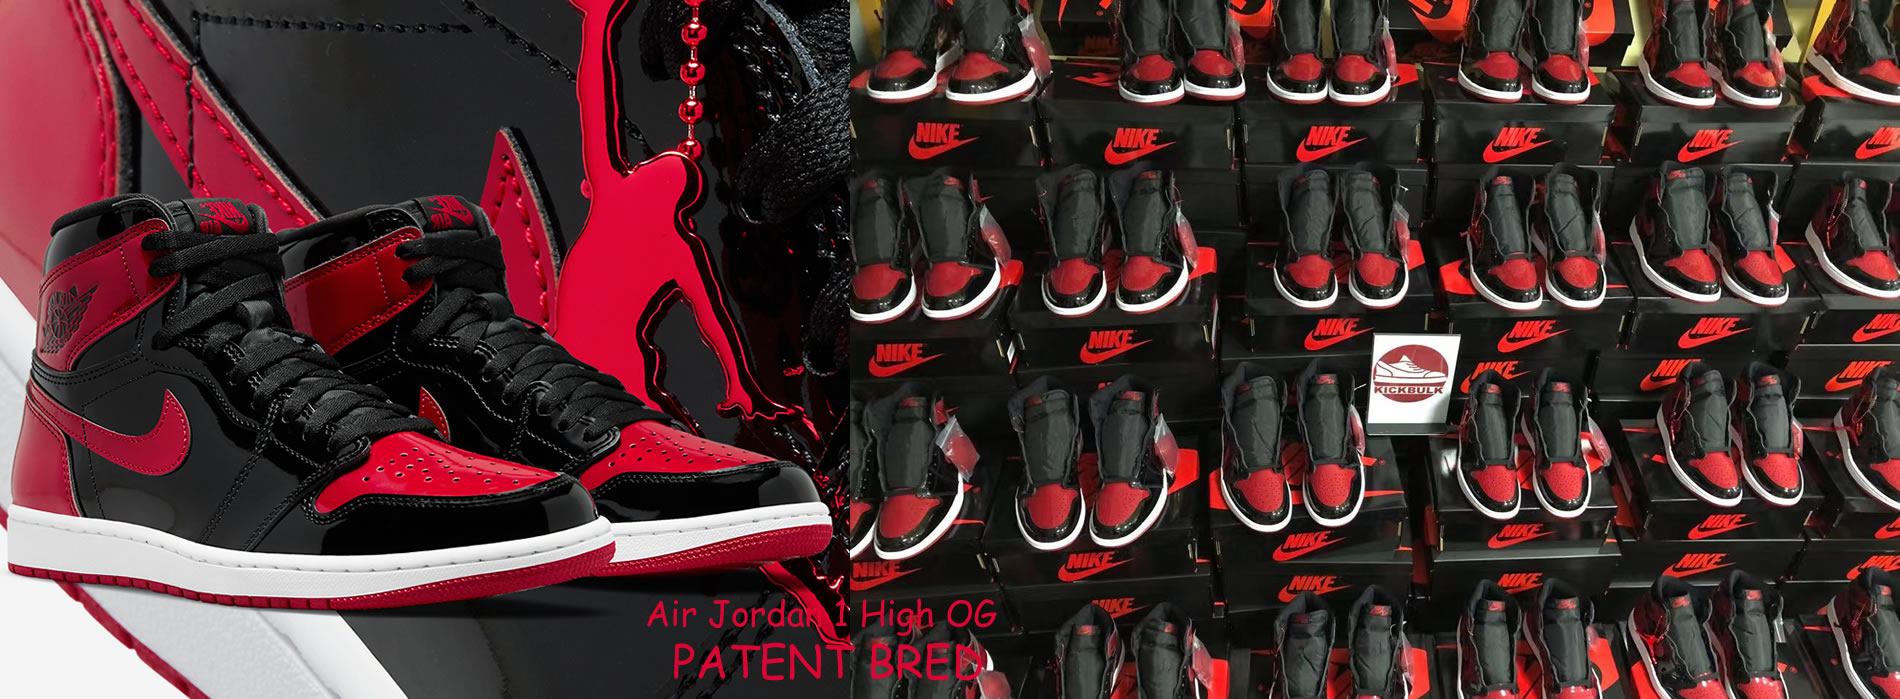 In addition to hiking boots RETRO HIGH OG PATENT 'BRED' 555088-063